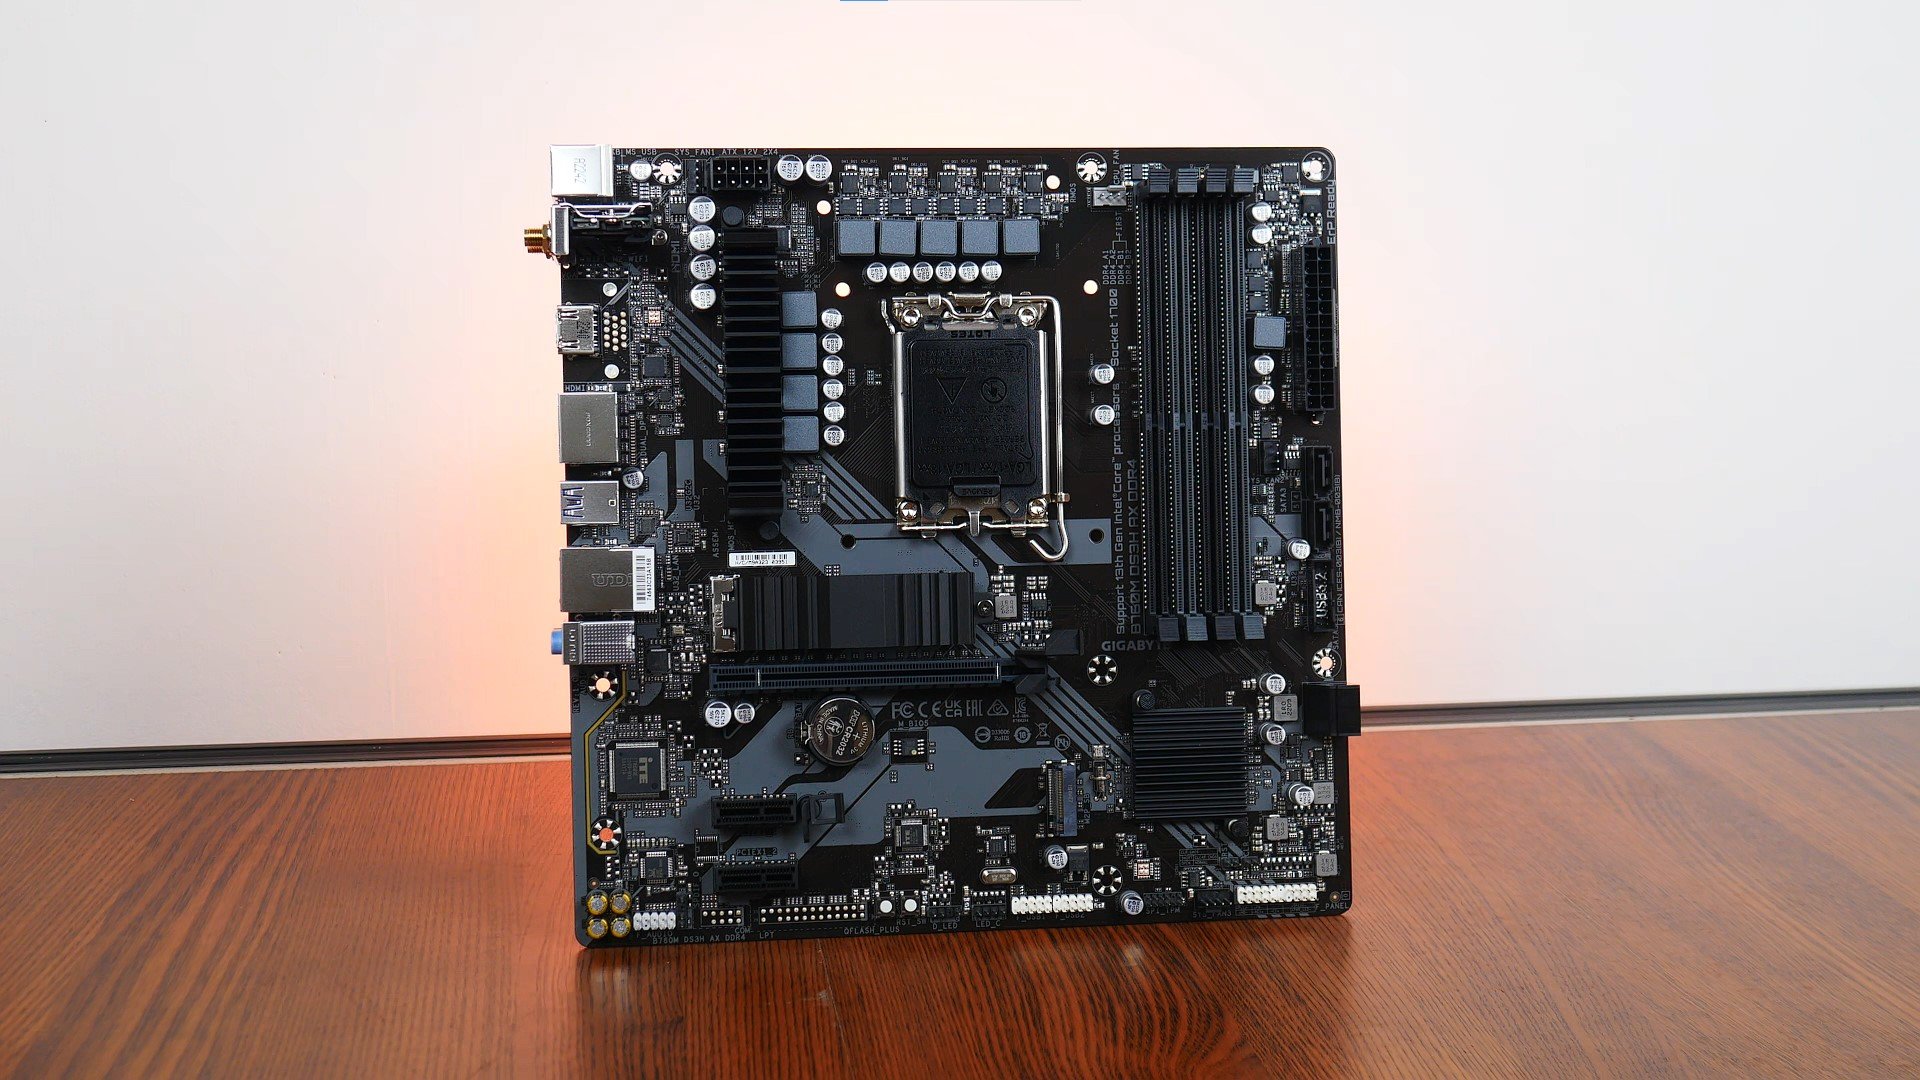 Gigabyte's mid-range Intel B660 Gaming X DDR4 motherboard pictured 